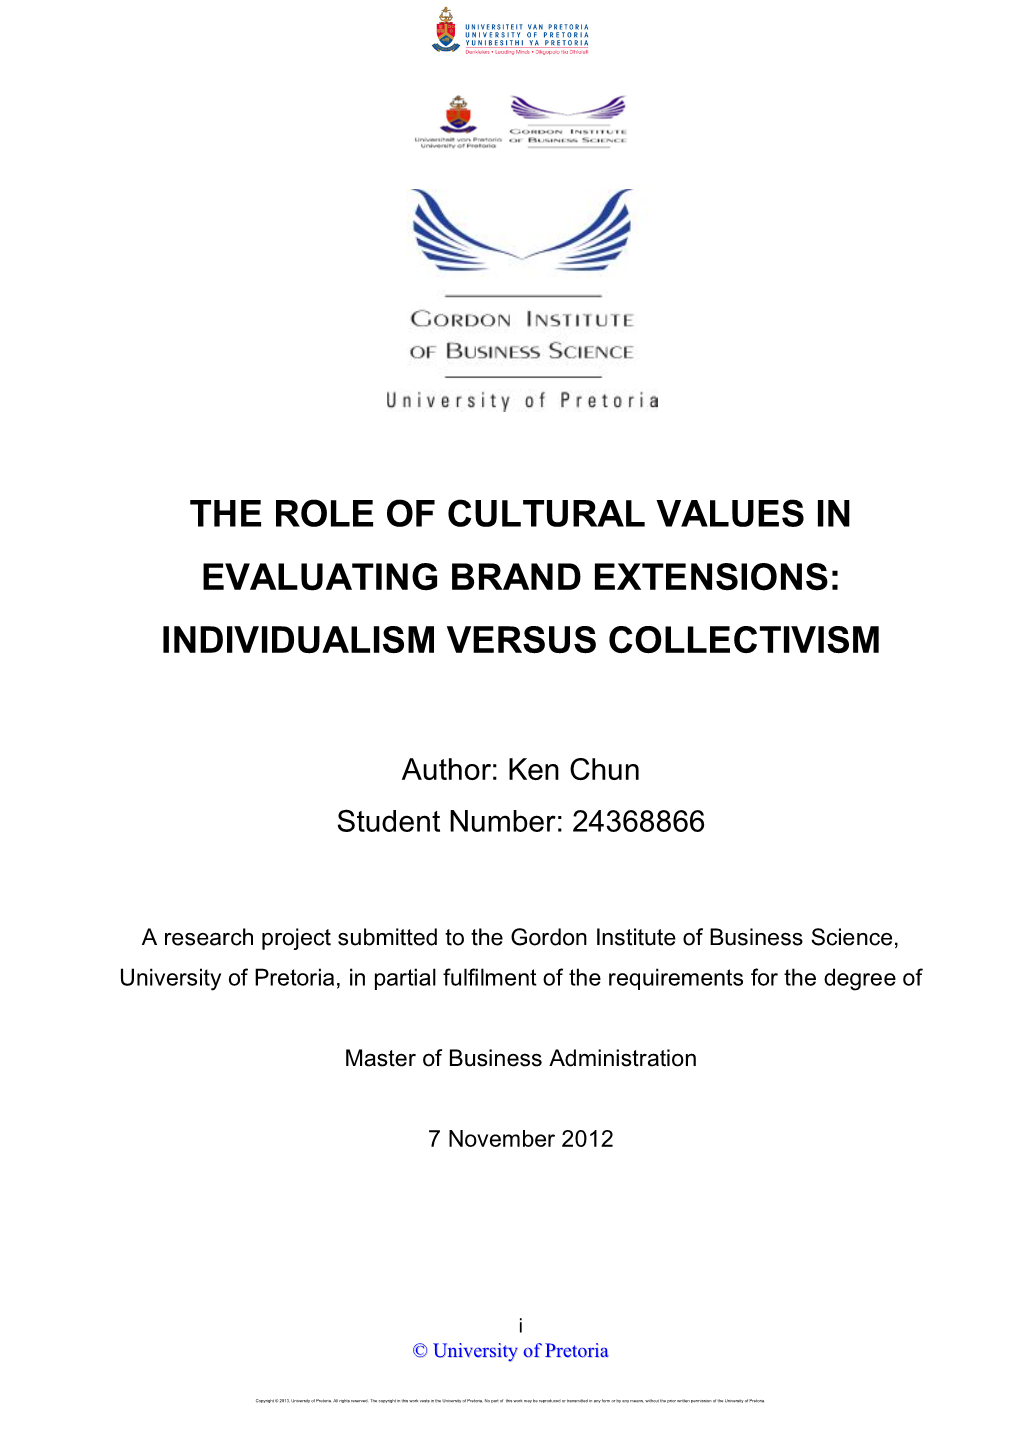 The Role of Cultural Values in Evaluating Brand Extensions: Individualism Versus Collectivism